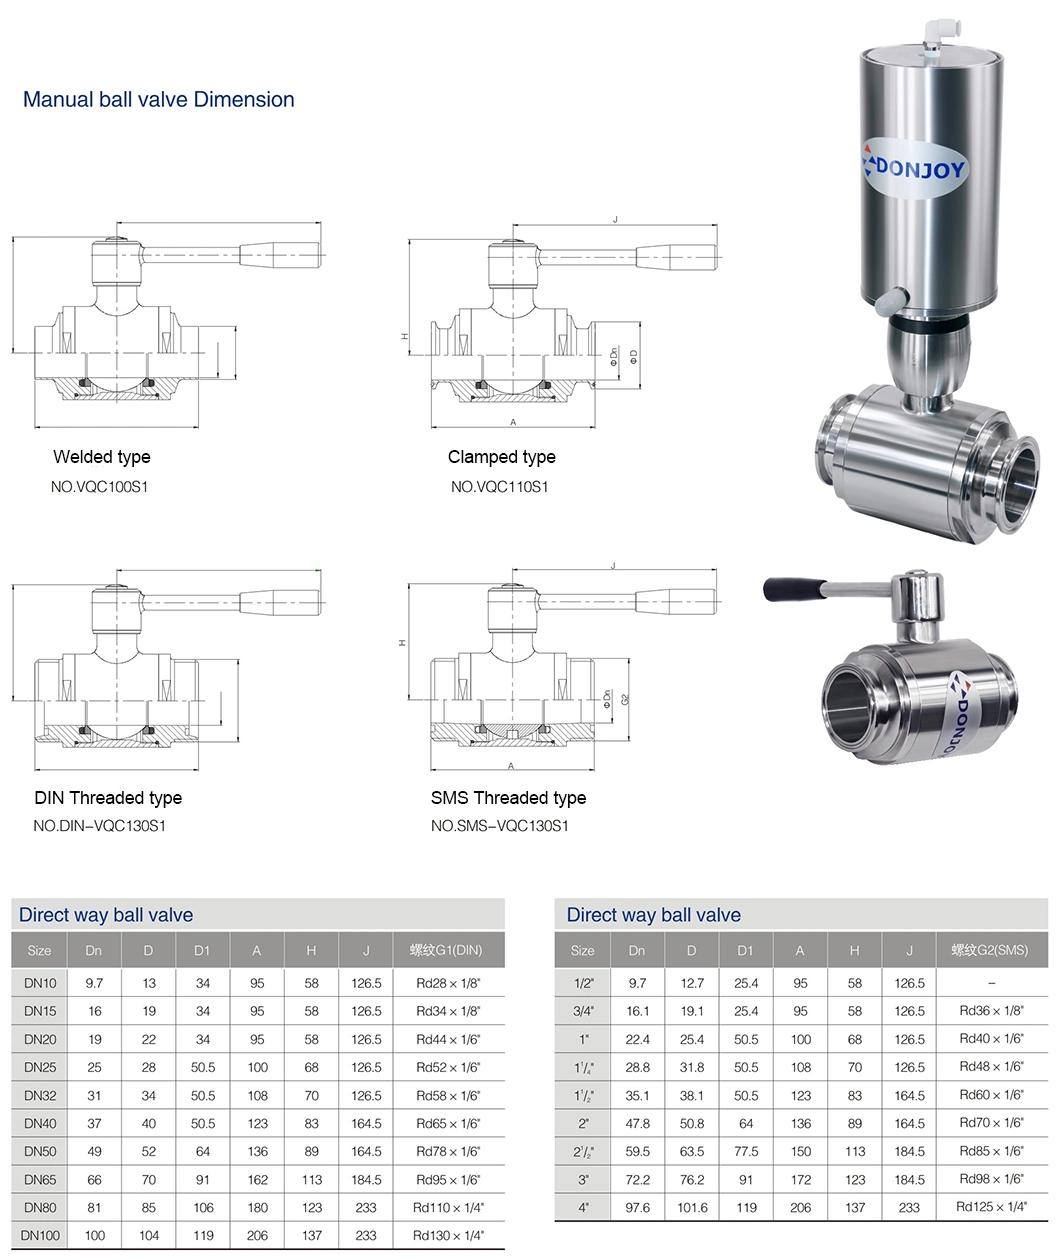 Us 3A Stainless Steel 3-Way Ball Valve with Red Actuator